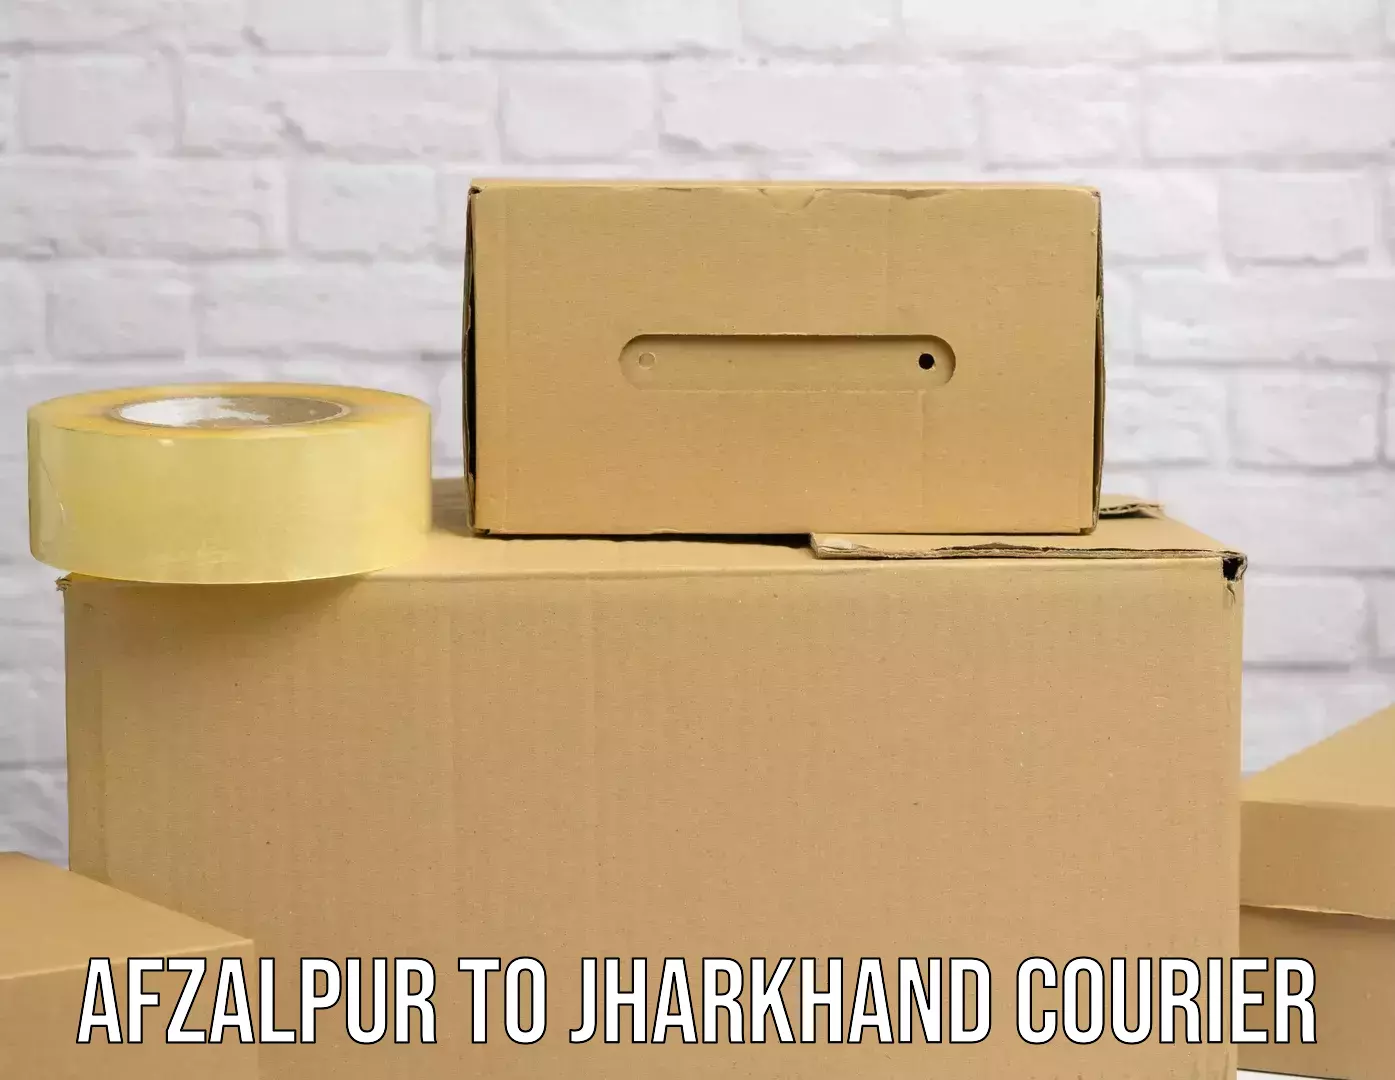 Sustainable delivery practices Afzalpur to Jharkhand